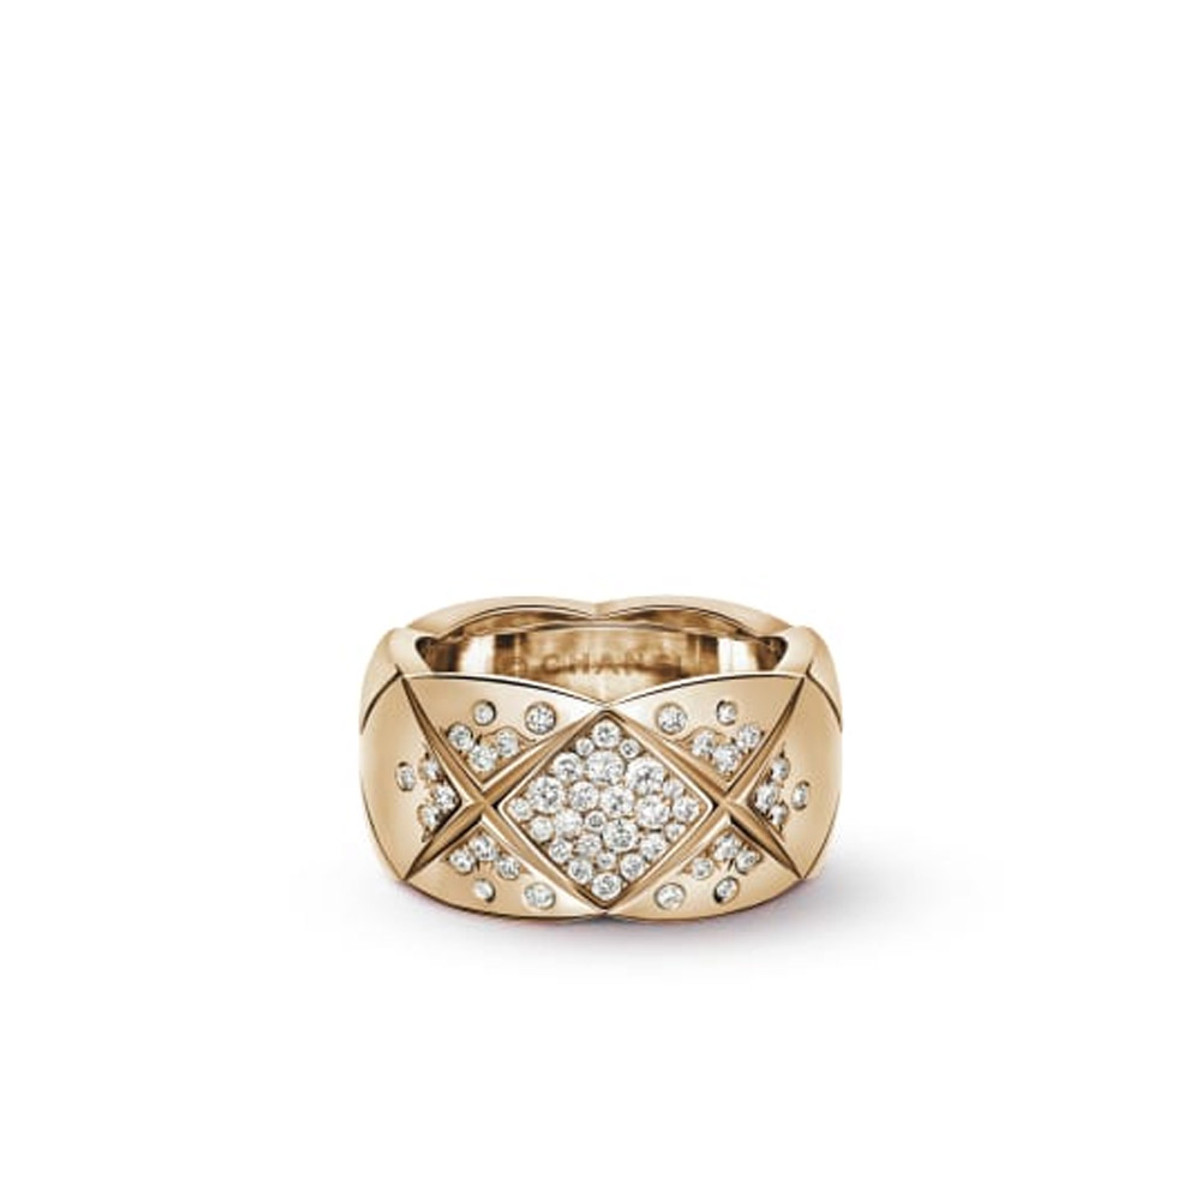 CHANEL COCO CRUSH RING-25962 Product Image